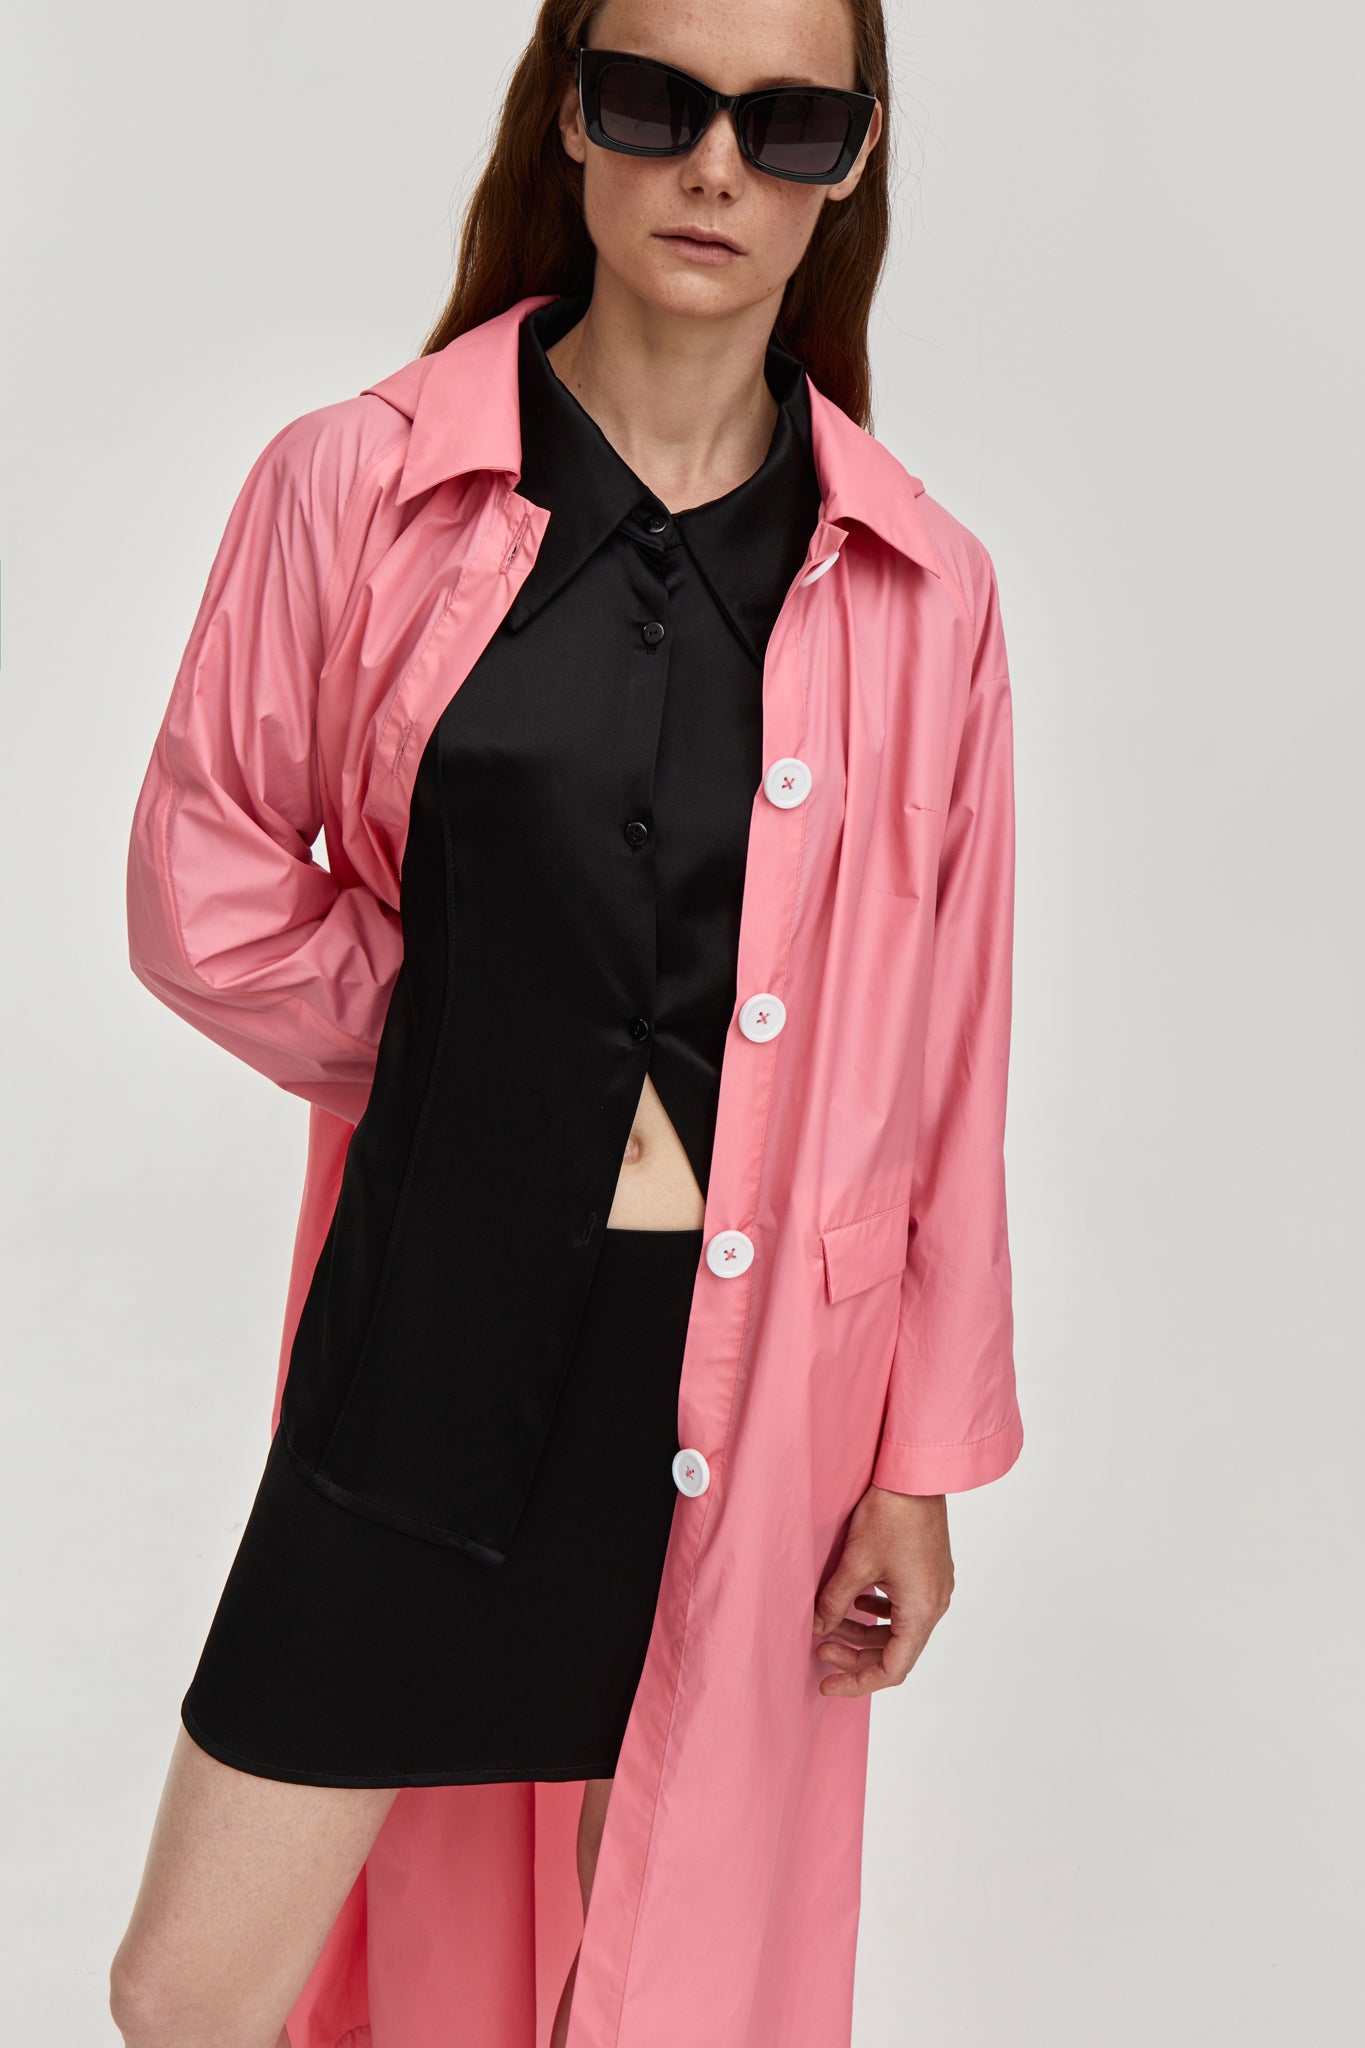 Summer raincoat with removable hood. Made from pink waterproof and breathable fabric. FORMA clothing